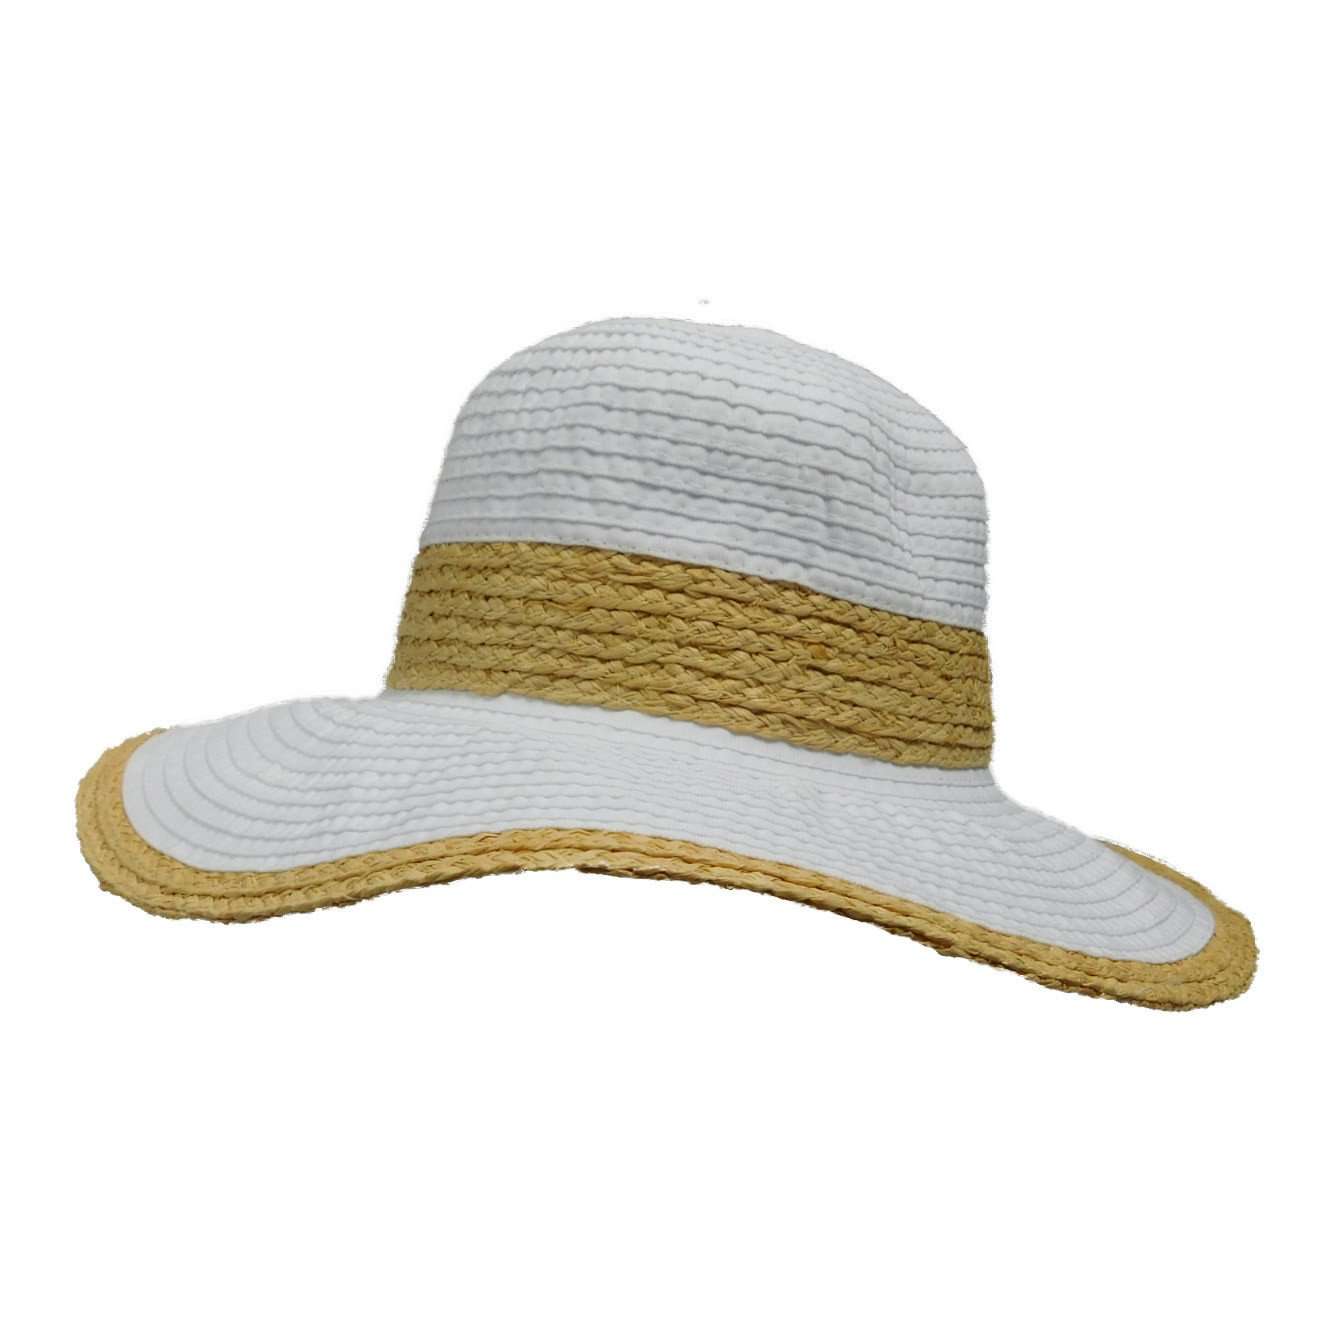 Ribbon Sun Hat with Raffia Trim by JSA for Women Floppy Hat Jeanne Simmons WSRS467WH White  